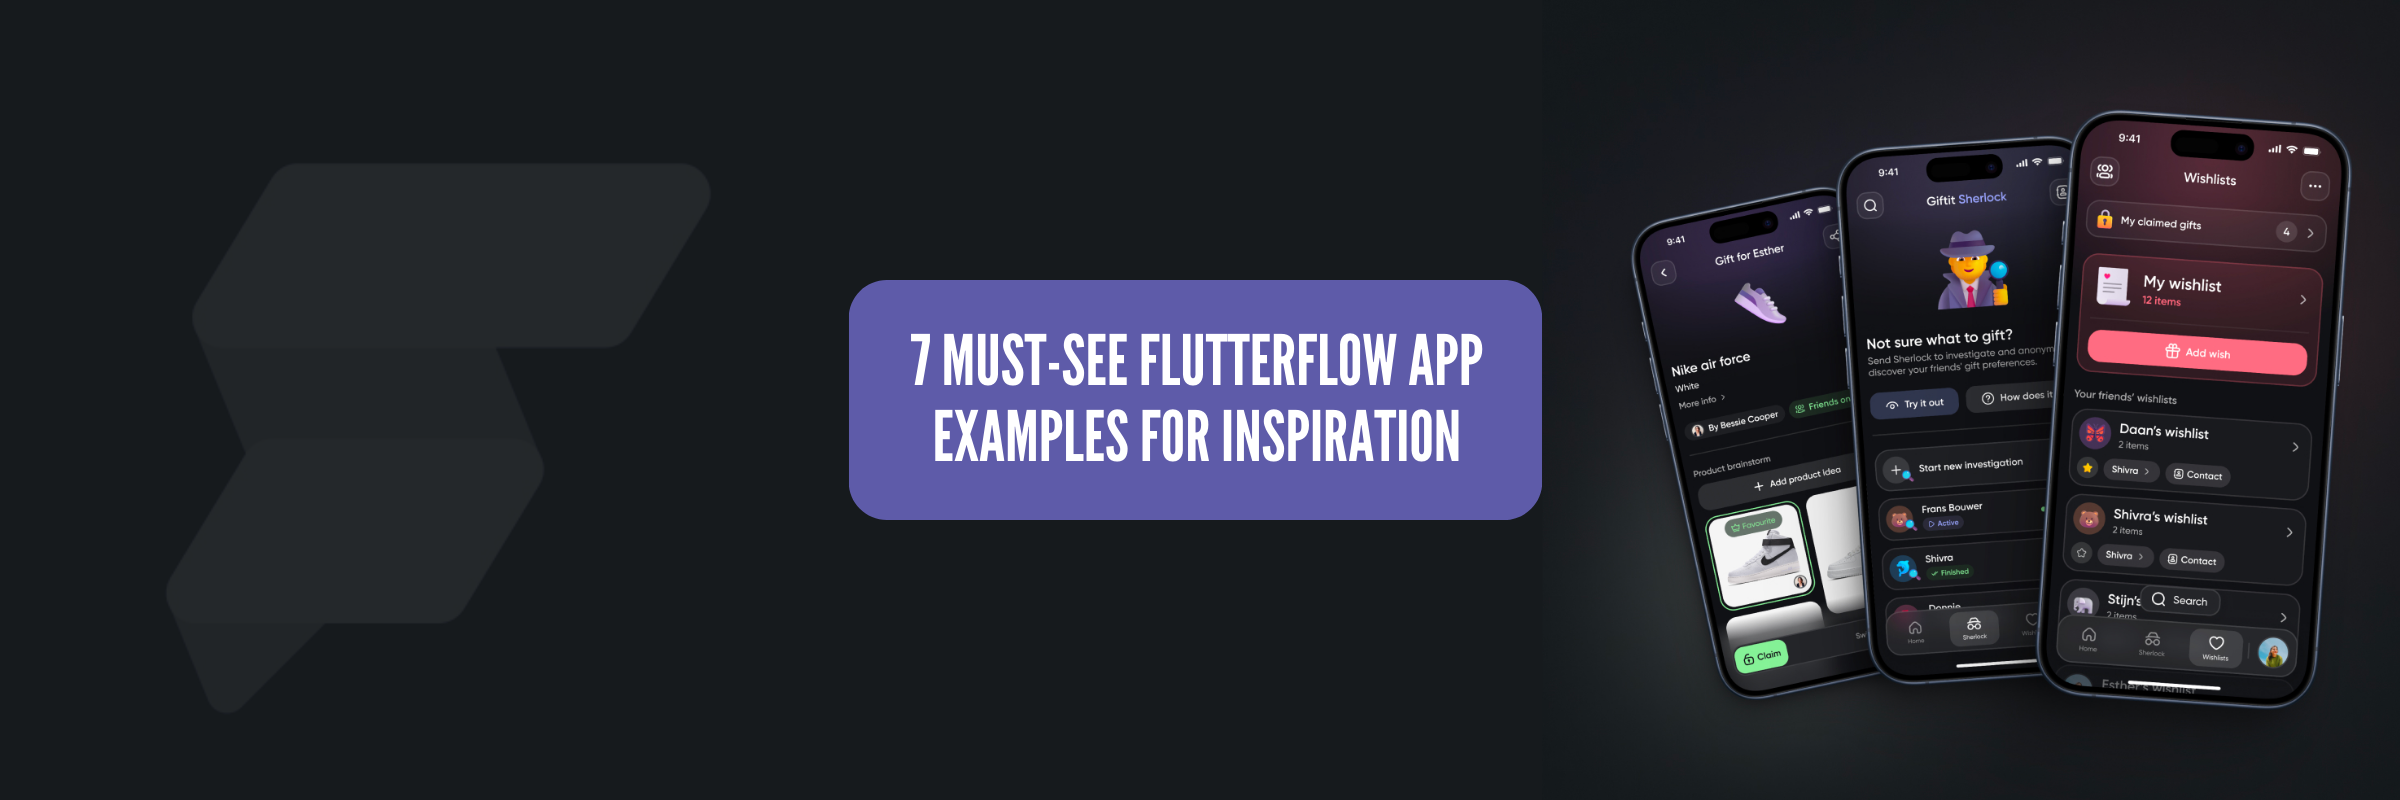 7 Must-See FlutterFlow App Examples For Inspiration